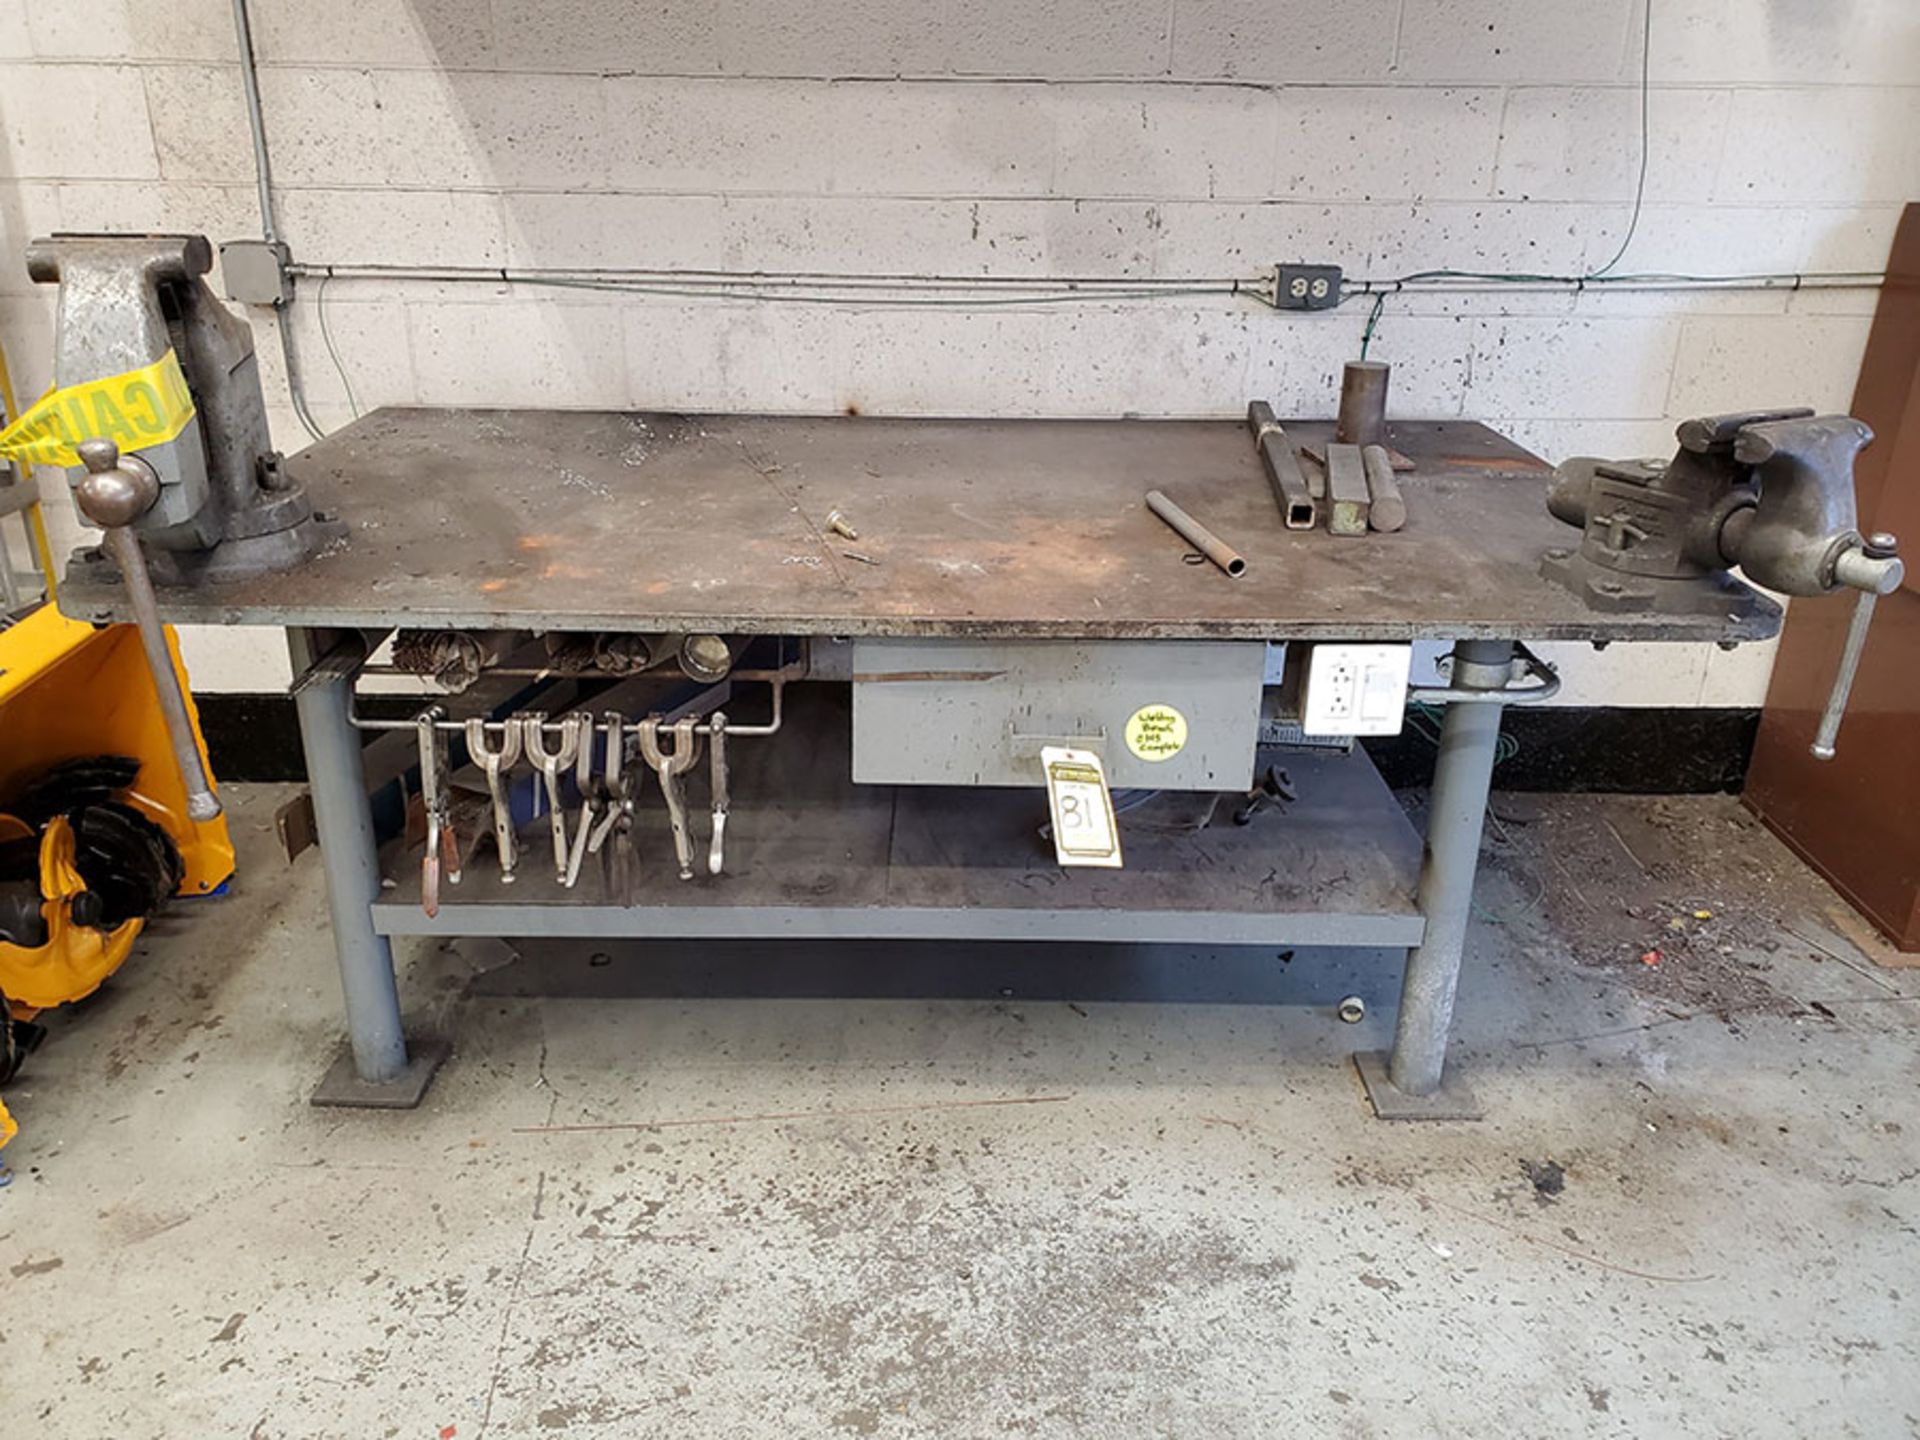 WELDING TABLE 4' X 7' X 1'' WITH L-3 STARRETT ATHOL VISE 326 AND 6 1/2'' JAW VISE